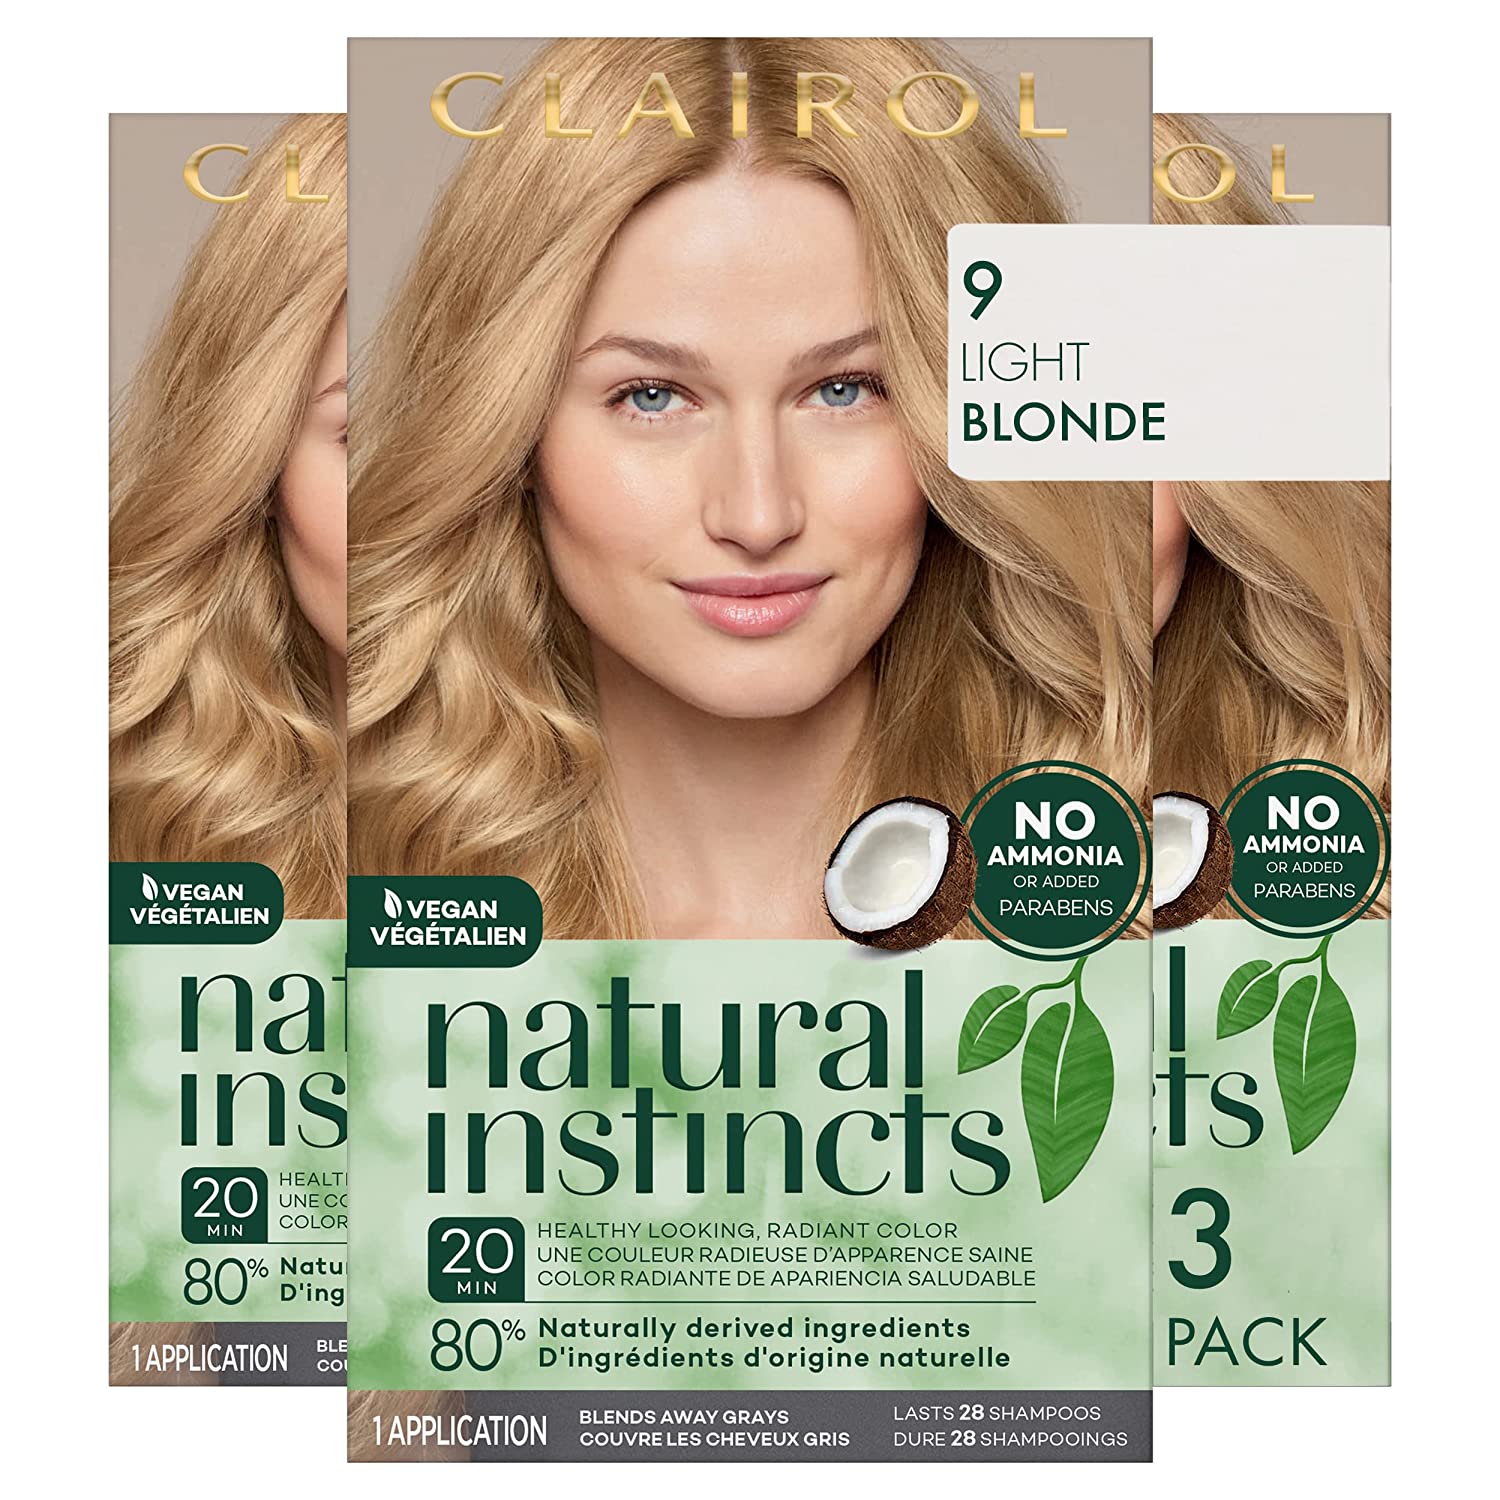  3. Clairol Natural Instincts is the best drugstore. 